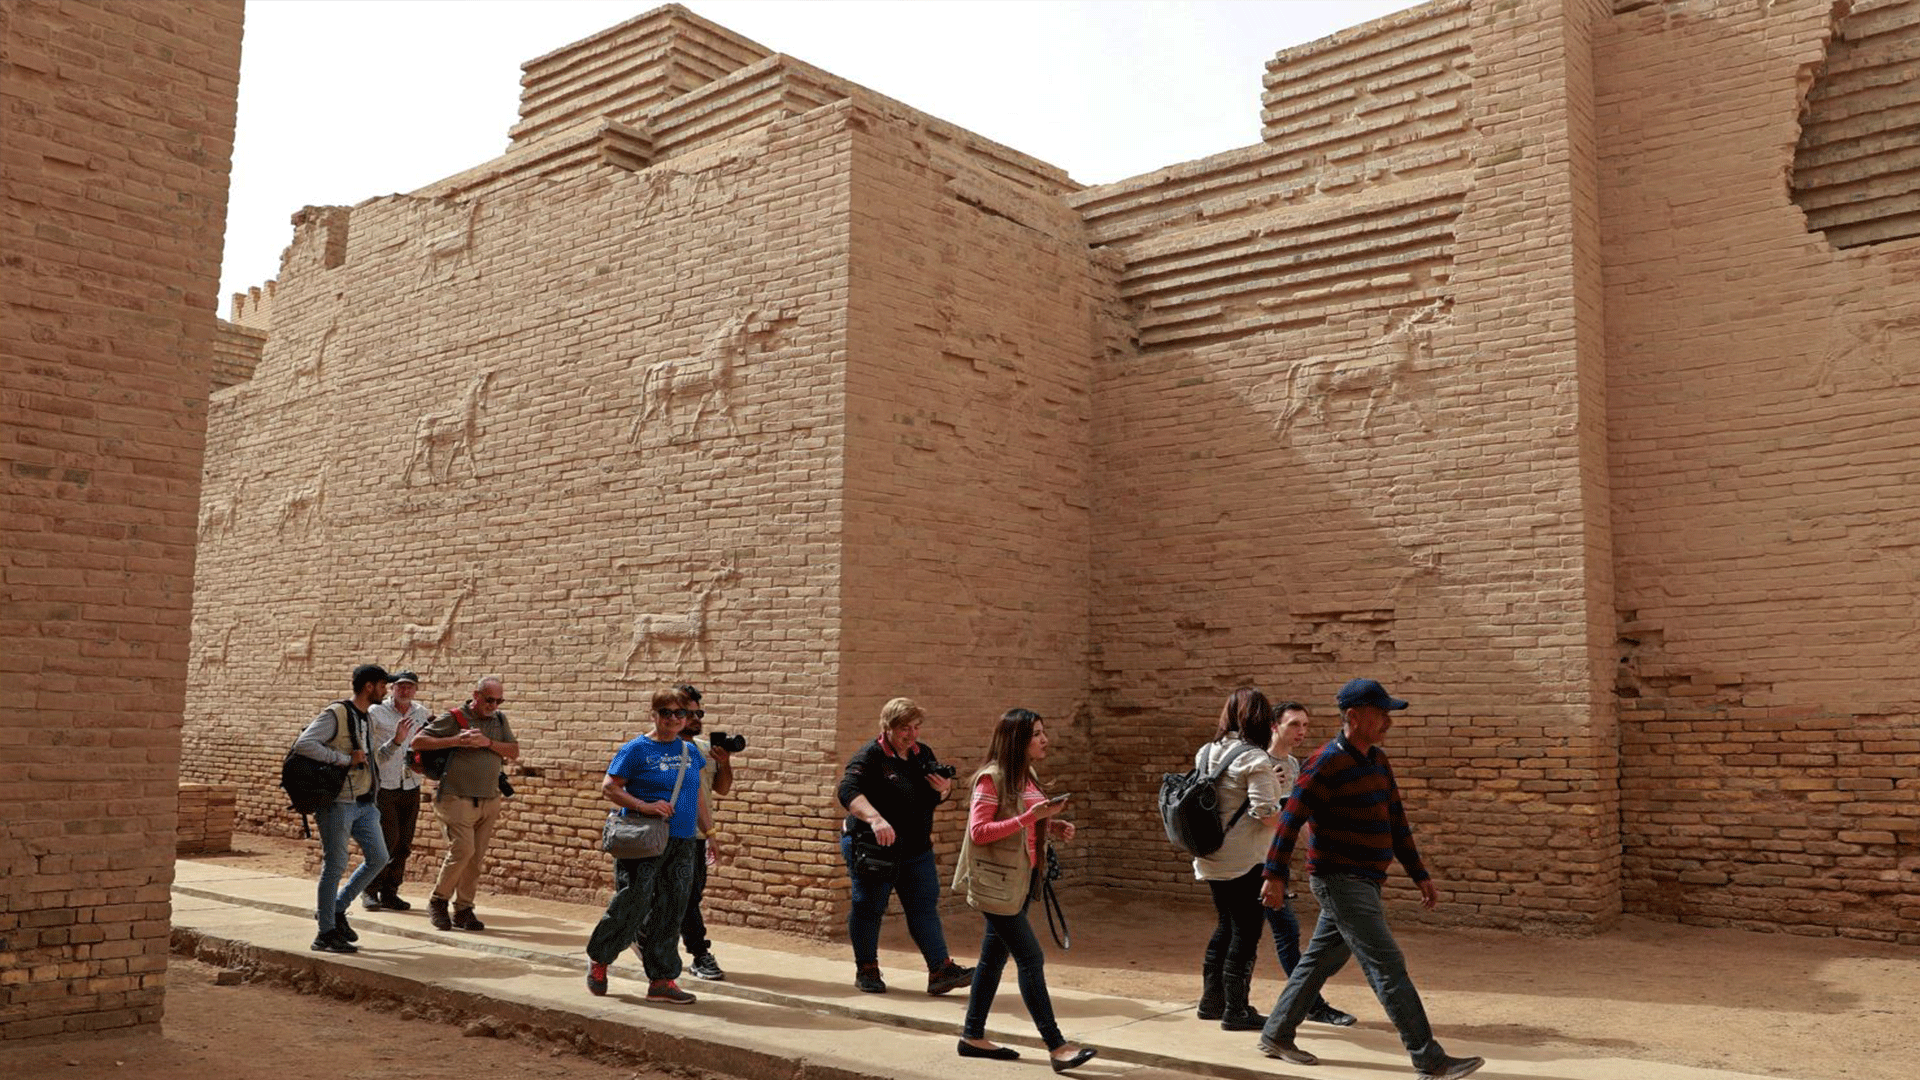  Foreign tourists visit the ancient city of Babylon, some 100km south of the Iraqi capital Baghdad, on March 7, 2022 (AFP photo)